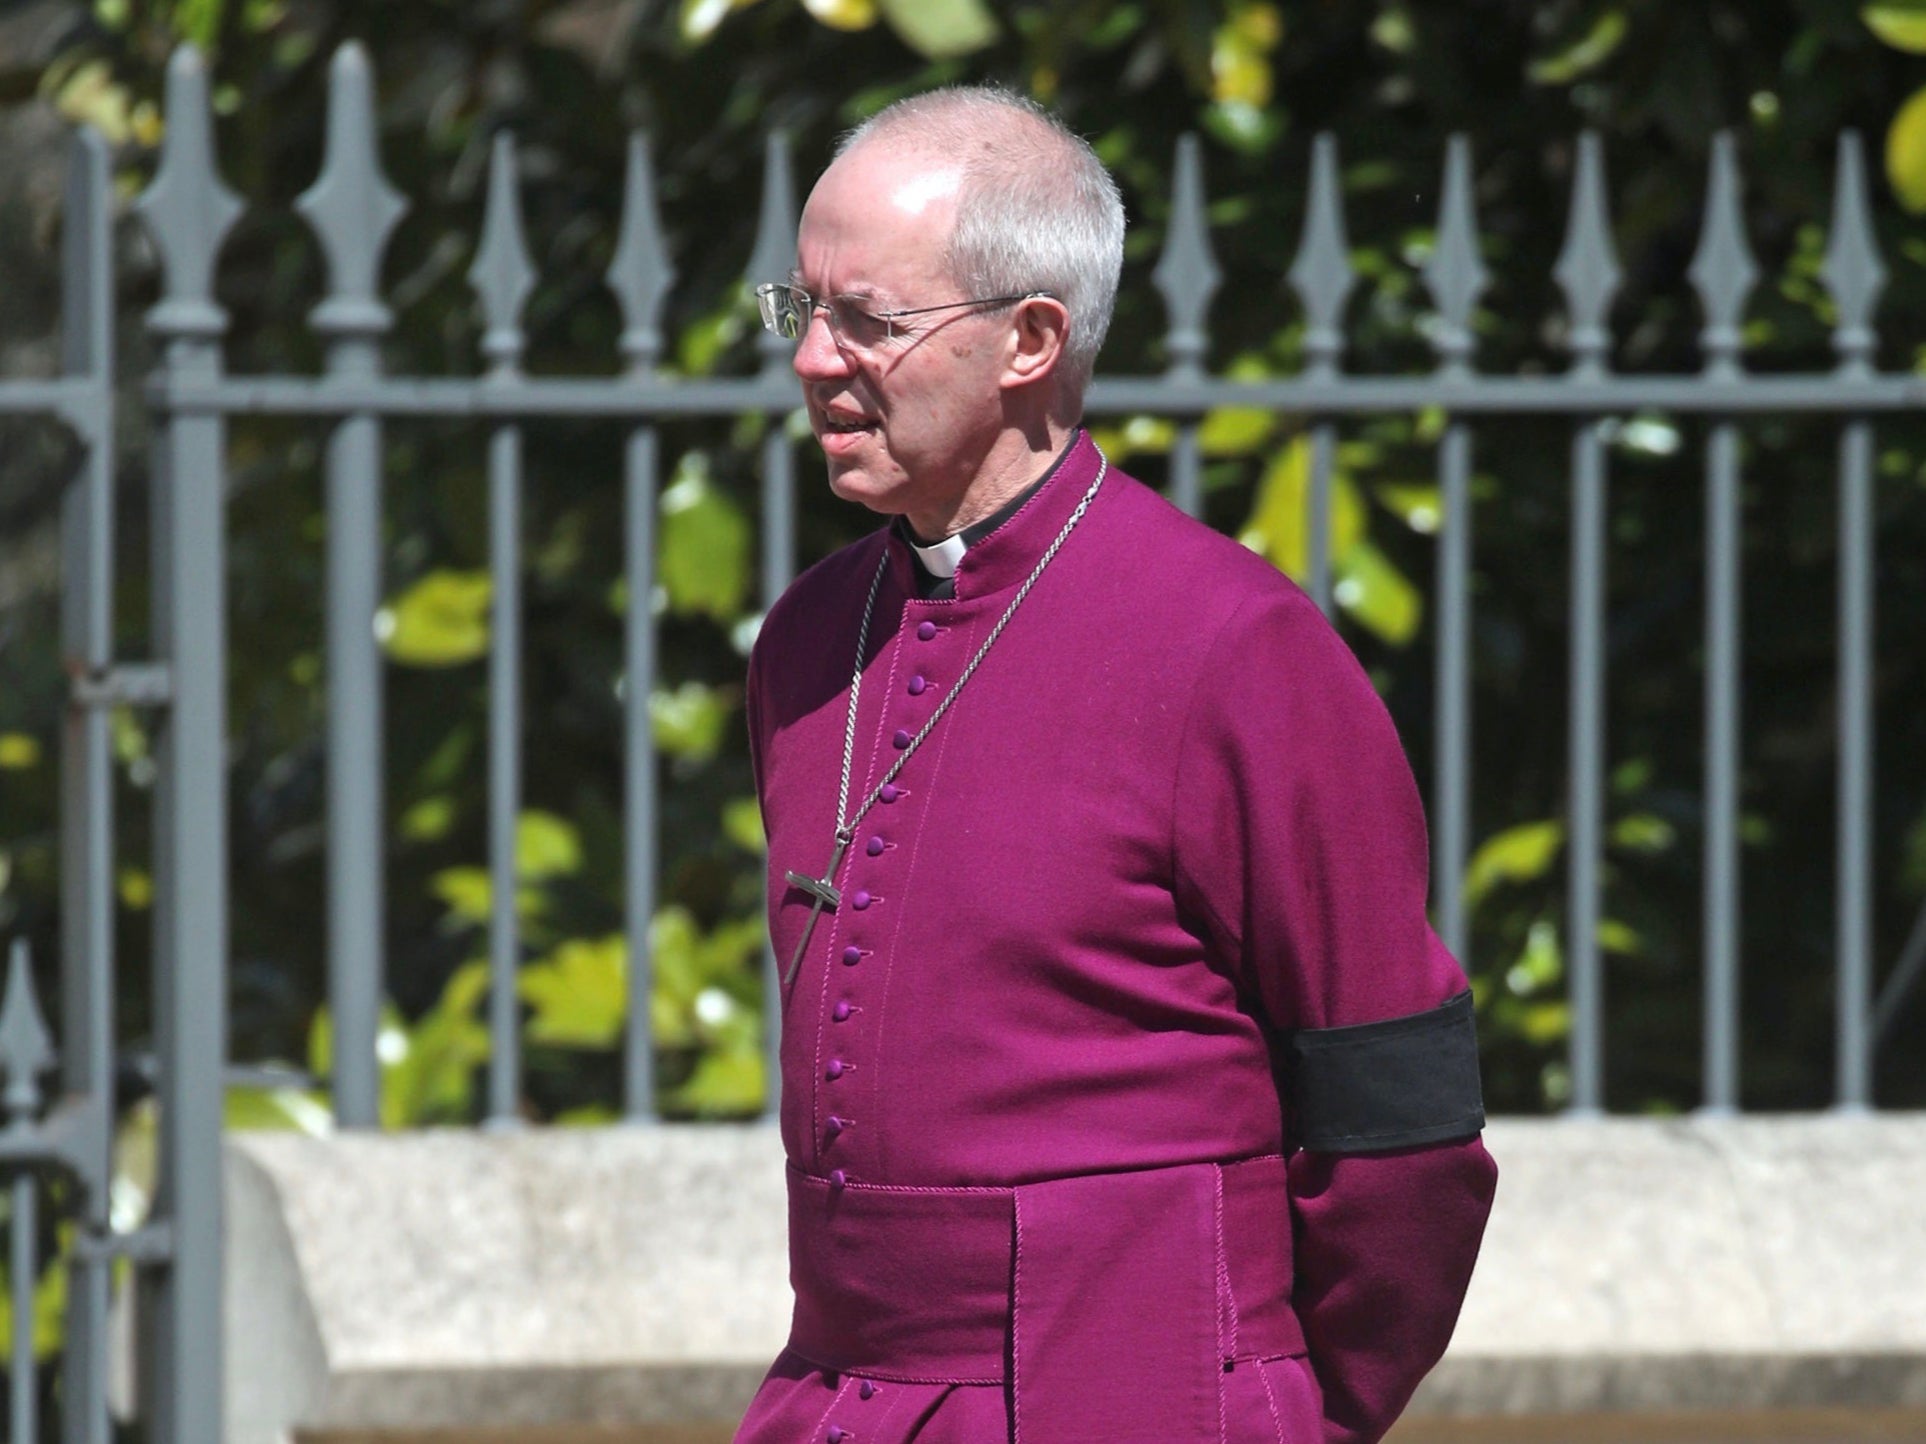 Archbishop of Canterbury arrives for funeral